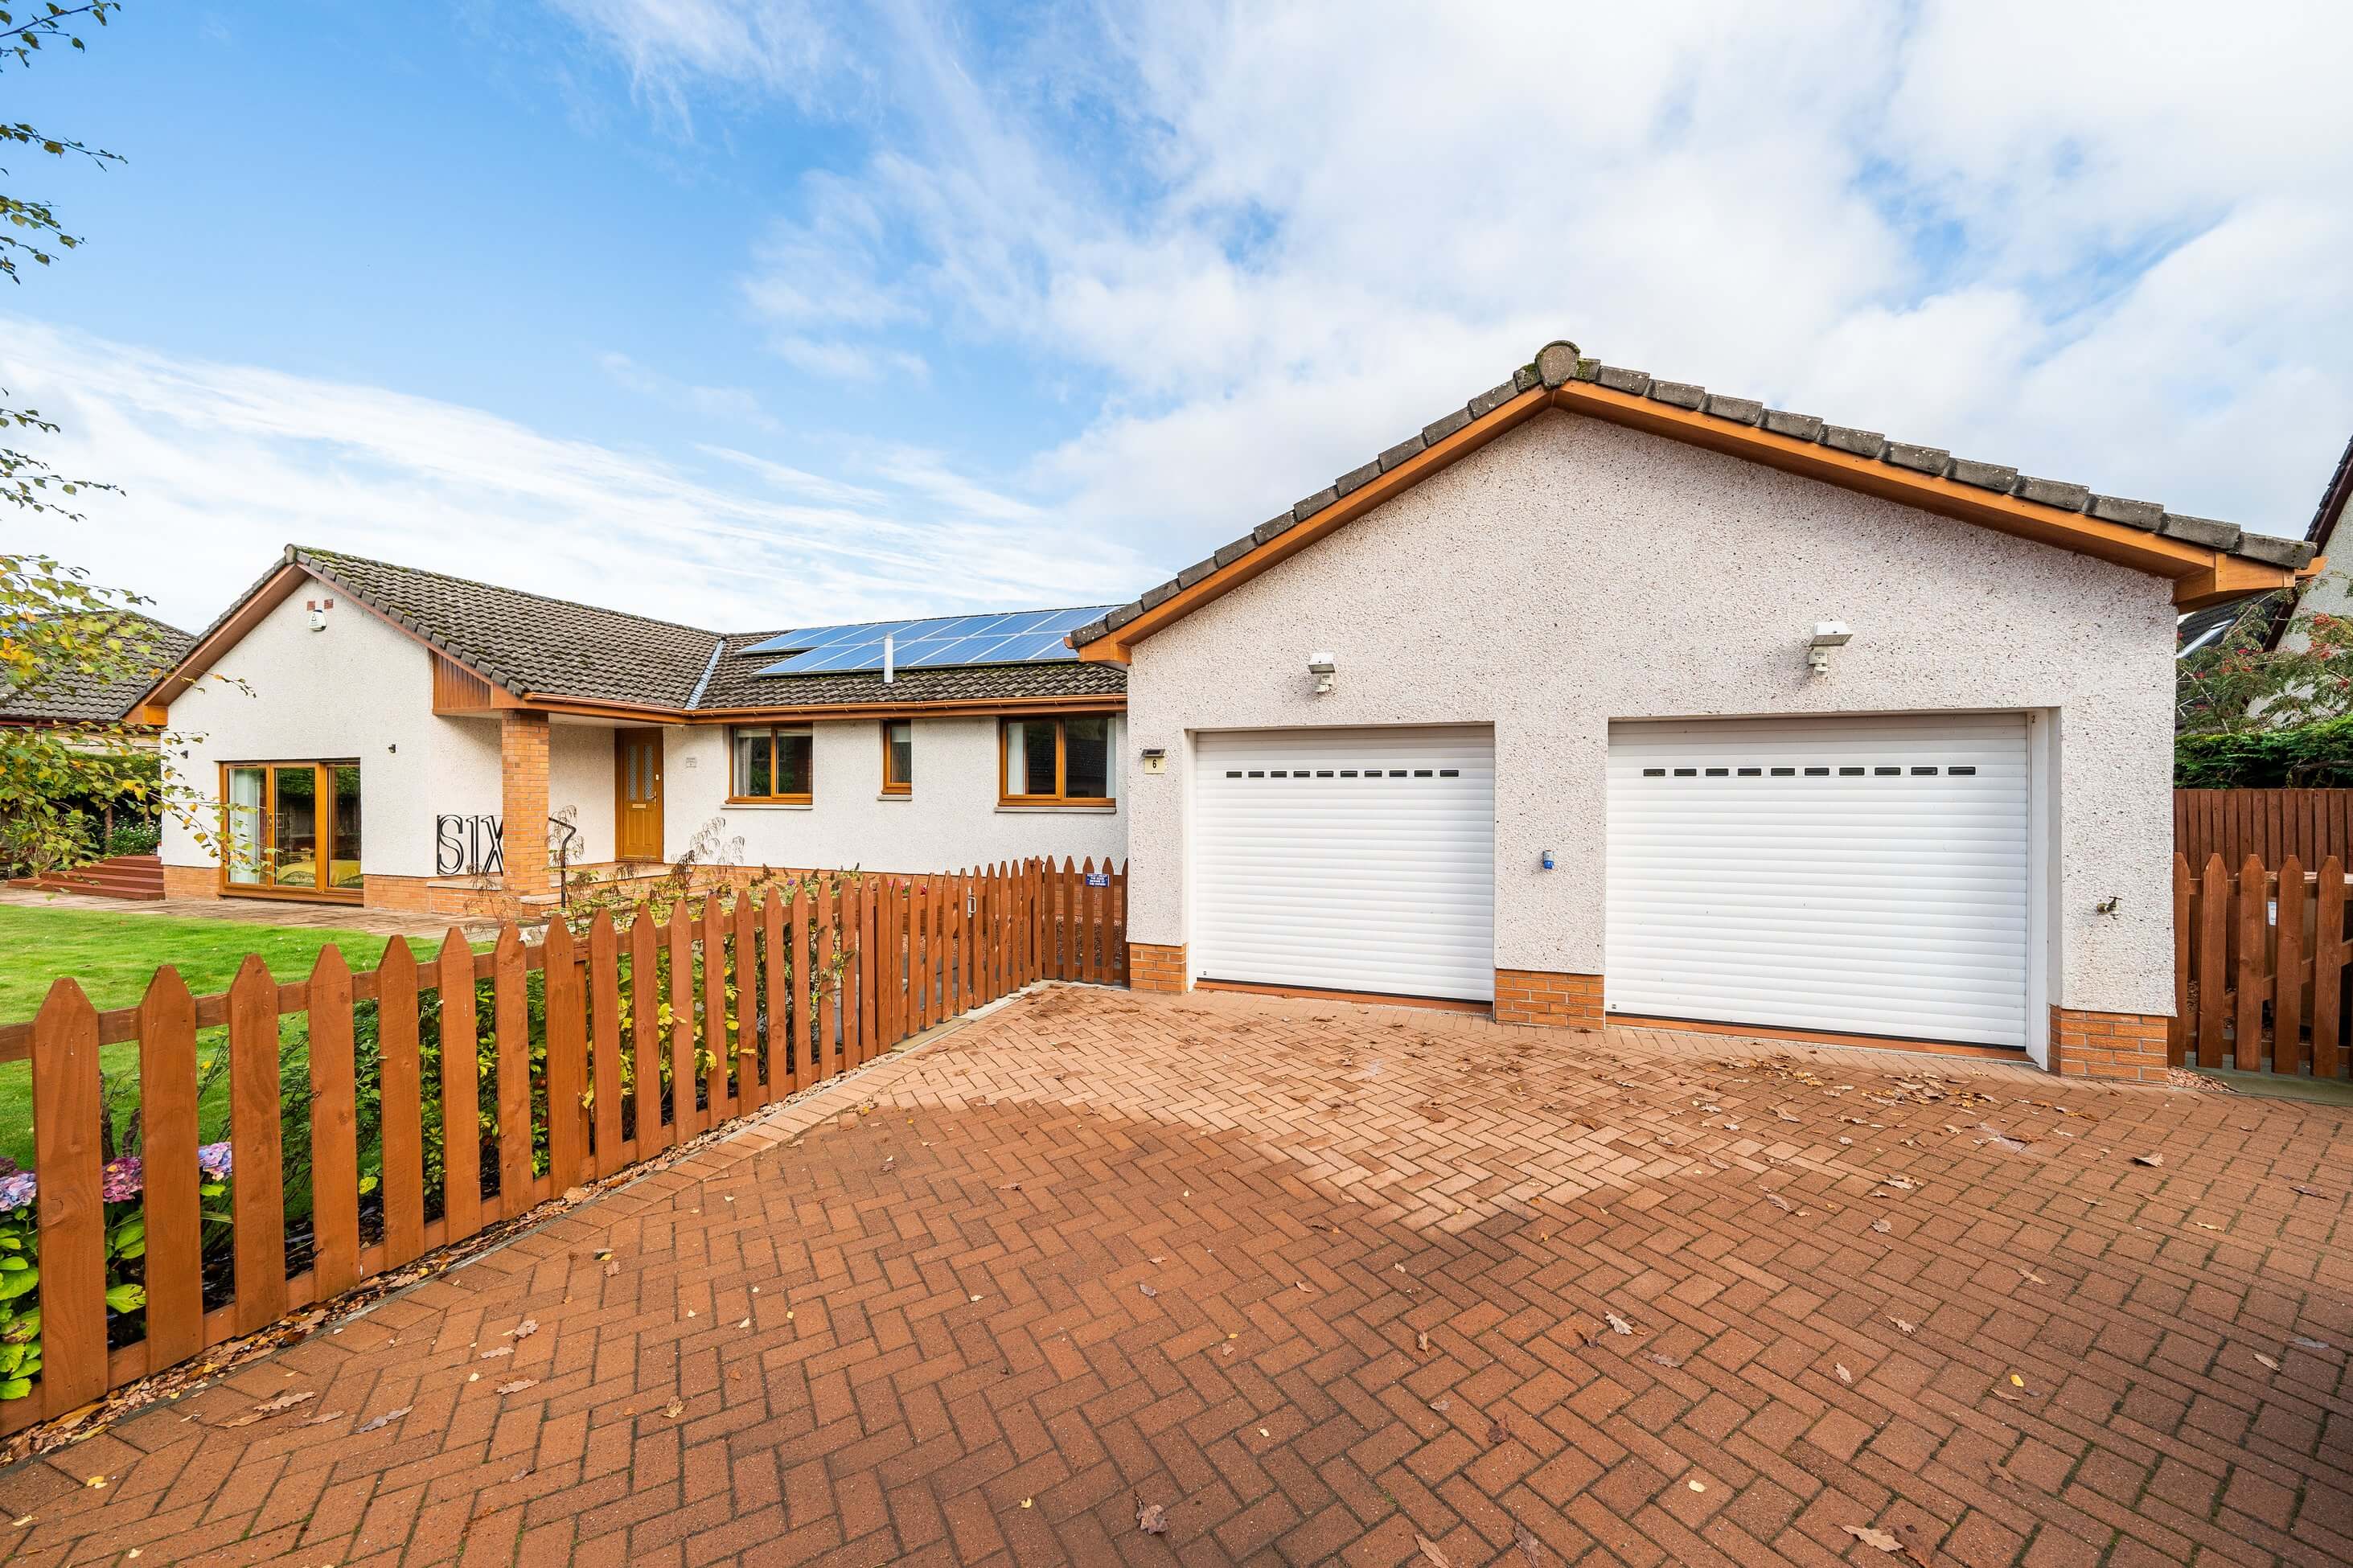 4 Bedroom House for Sale in Pitcairnfield, Perthshire